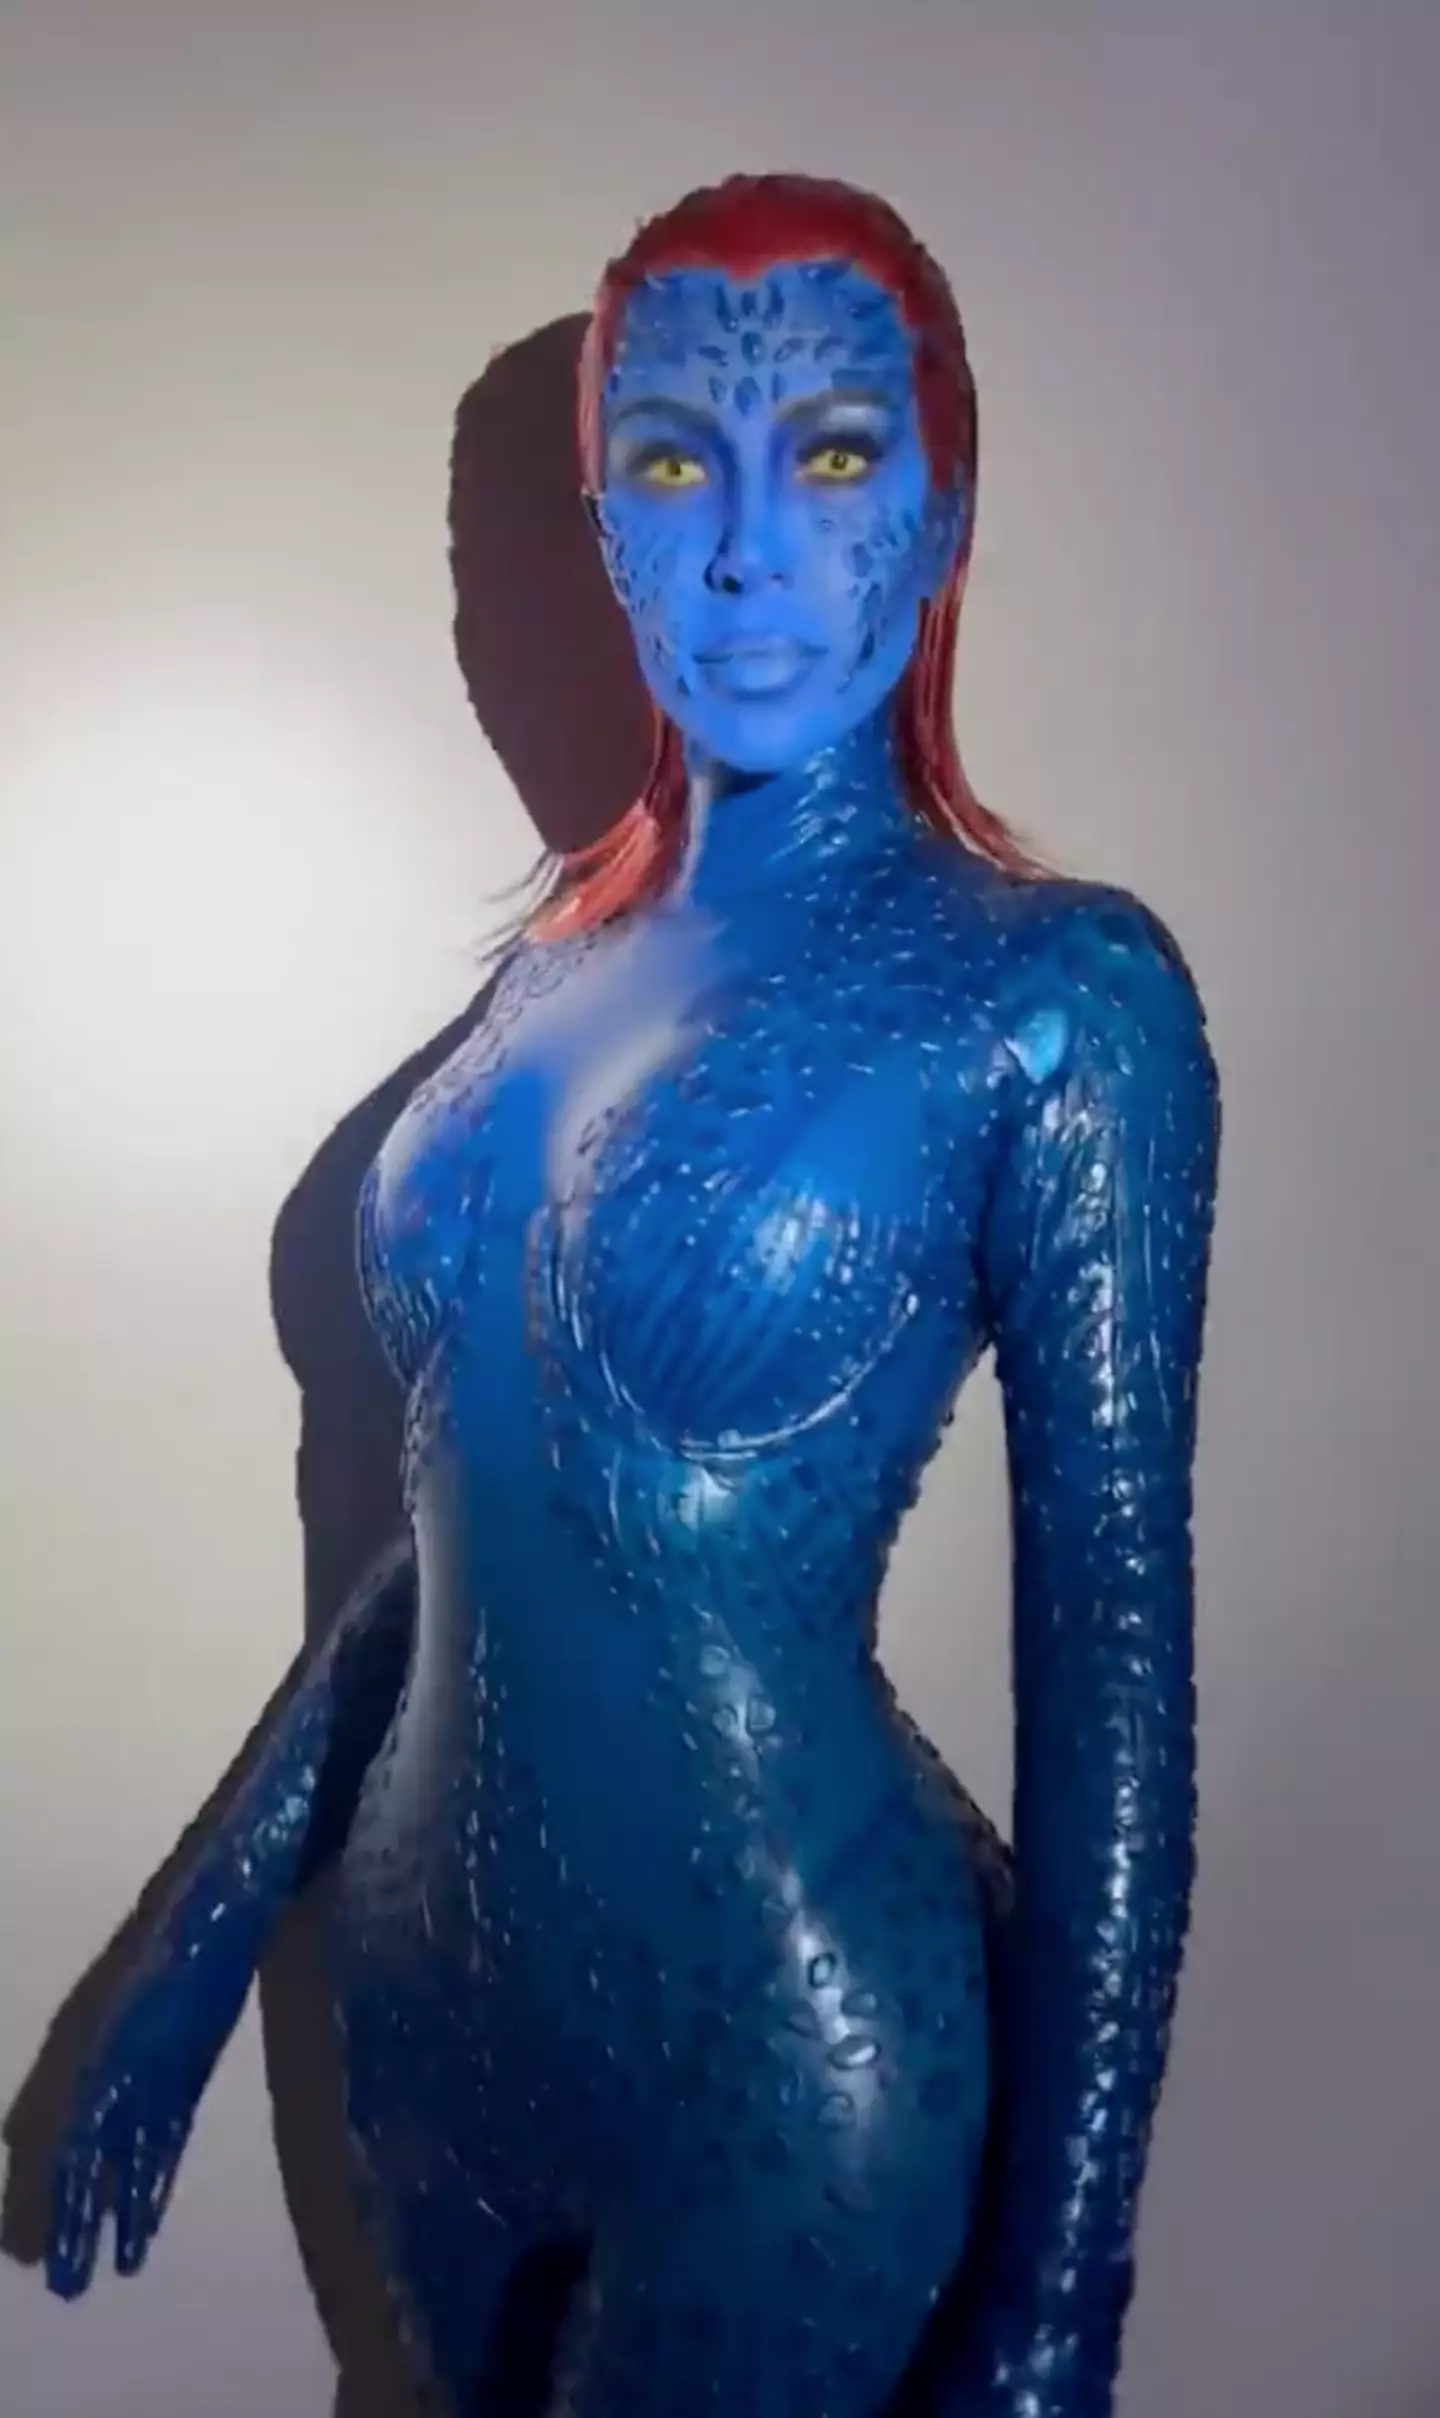 Fans think Kim Kardashian has gone on an 'audition' for a role in X-Men's MCU with her Mystique-inspired Halloween costume.